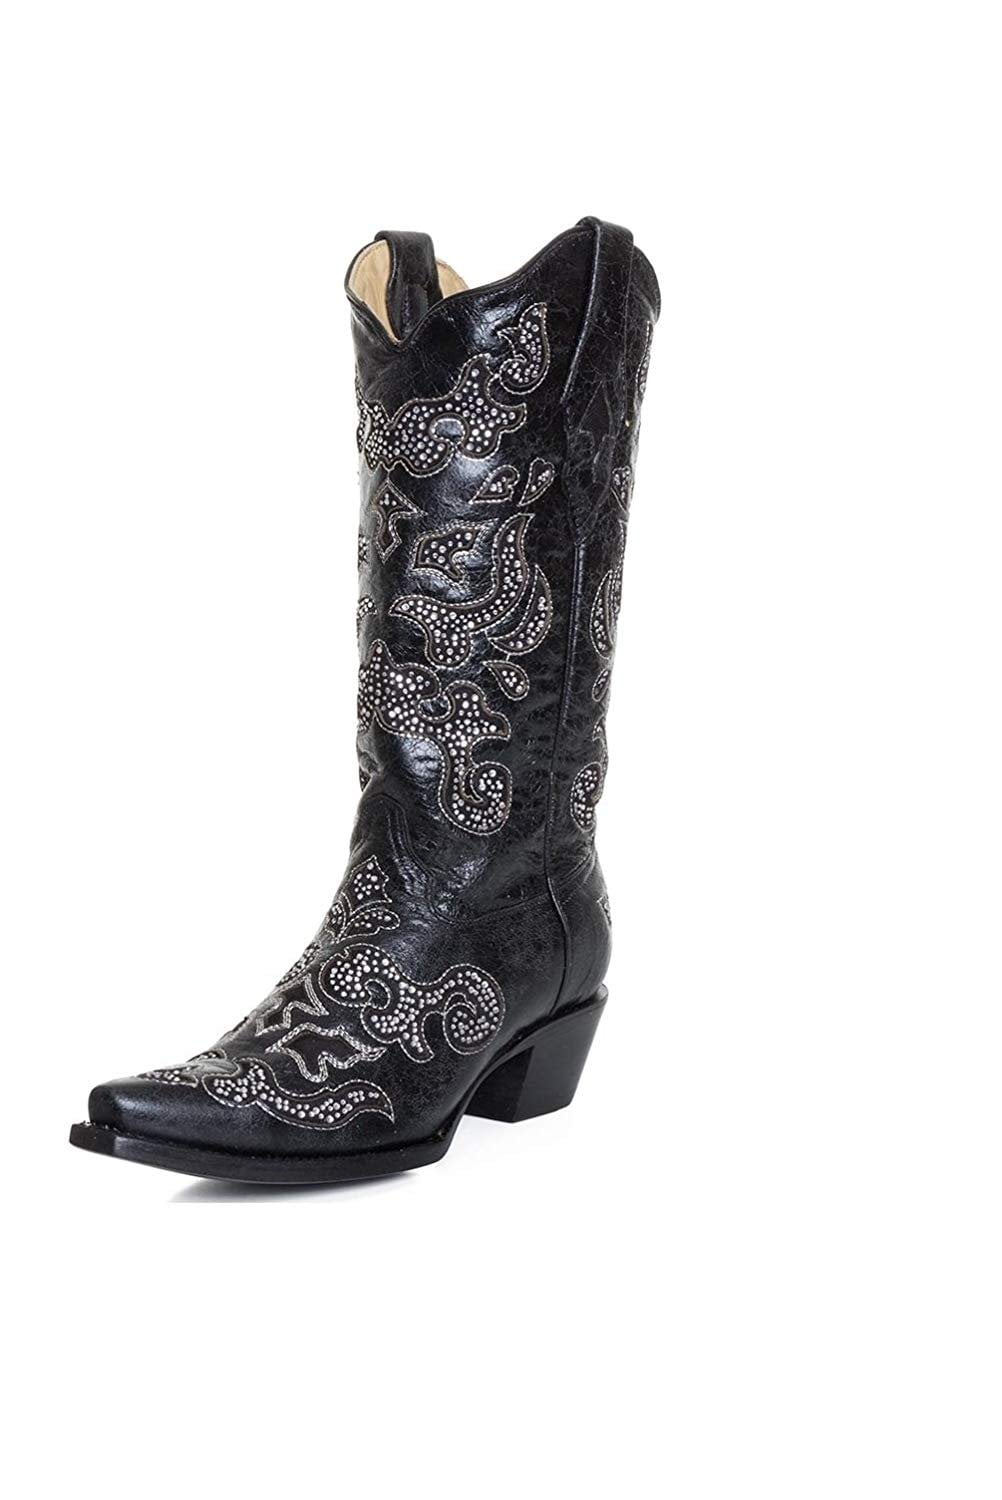 corral bling boots